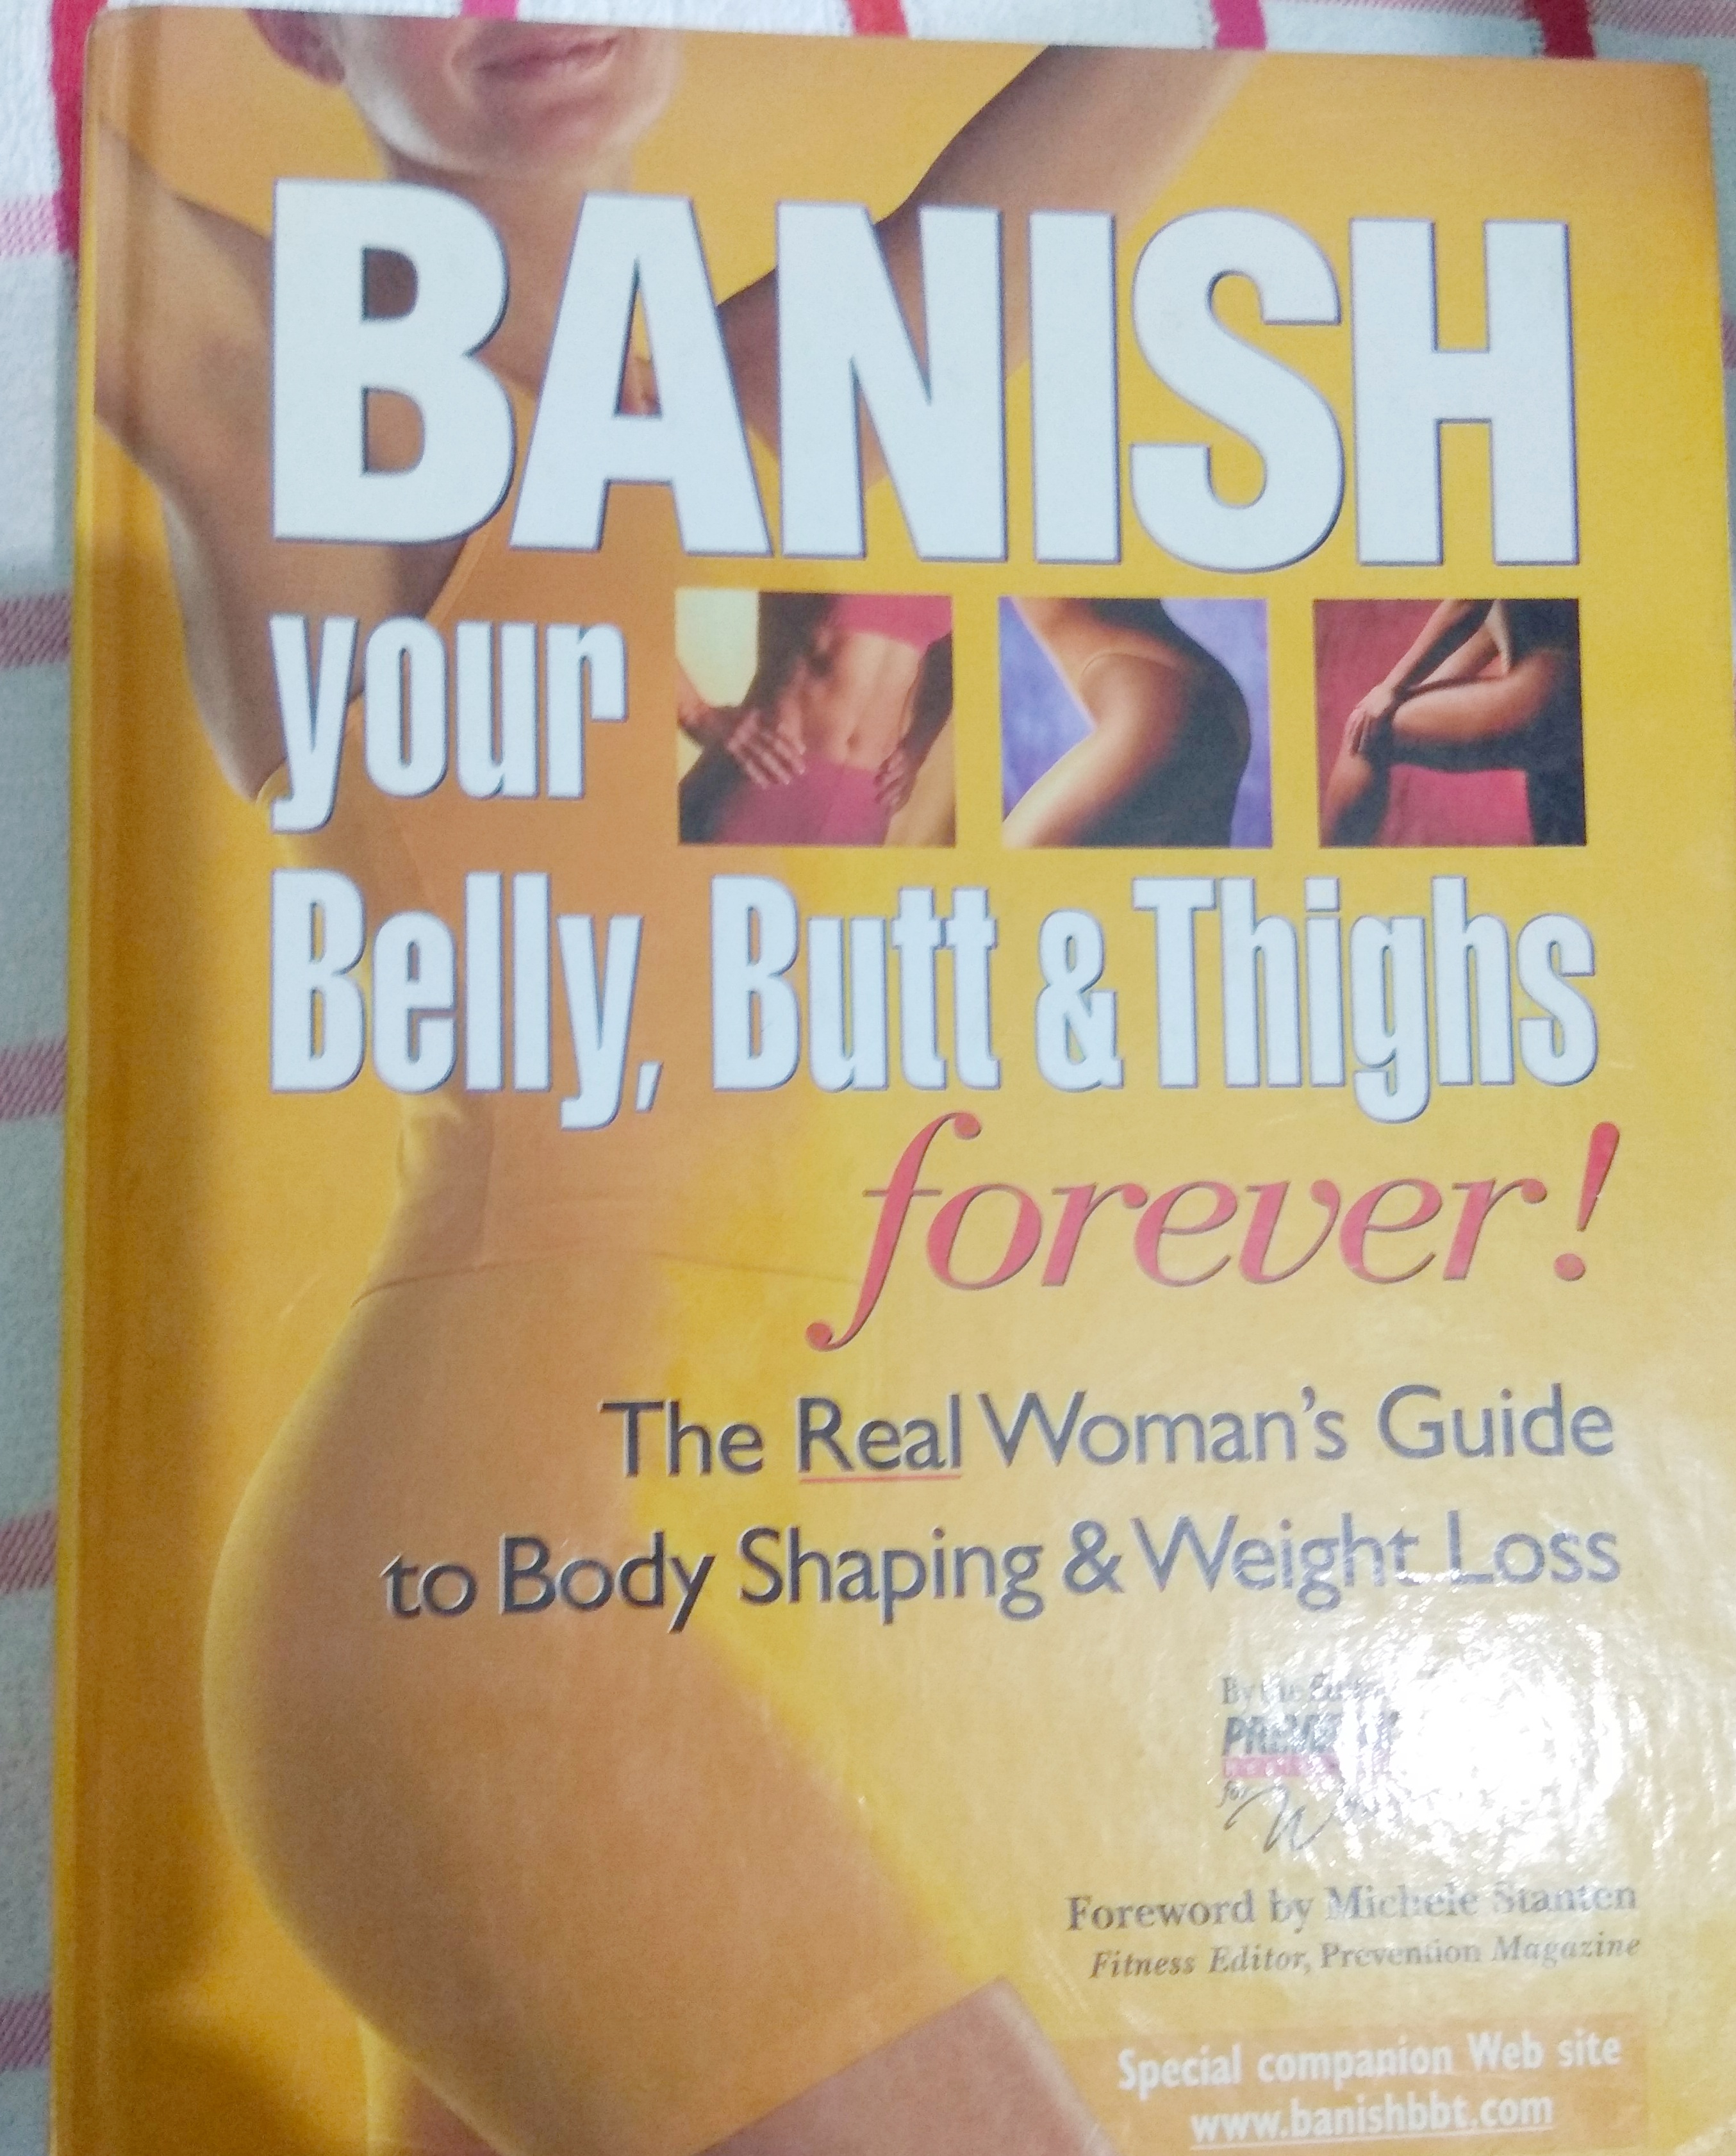 banish your belly, butt & thighs